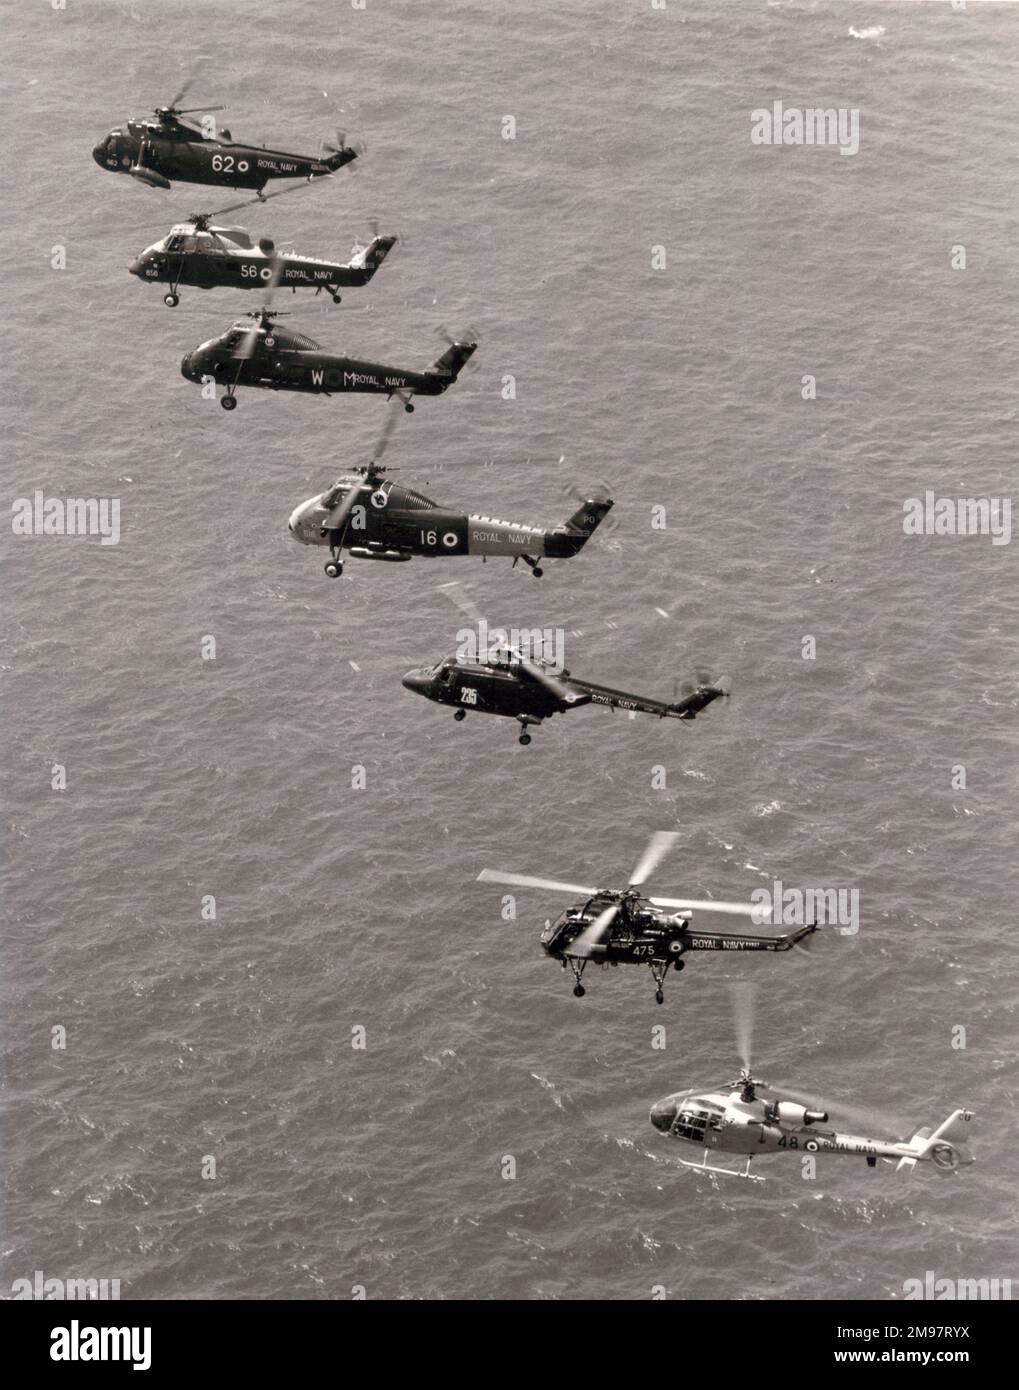 Royal Navy helicopters photographed off Portland. From top: Westland Sea King, Westland Wessex HAS1, Westland Wessex HU5, Westland Wessex HAS1, Westland Lynx, Westland Wasp HAS1 and Westlad Gazelle. c.July 1975. Stock Photo